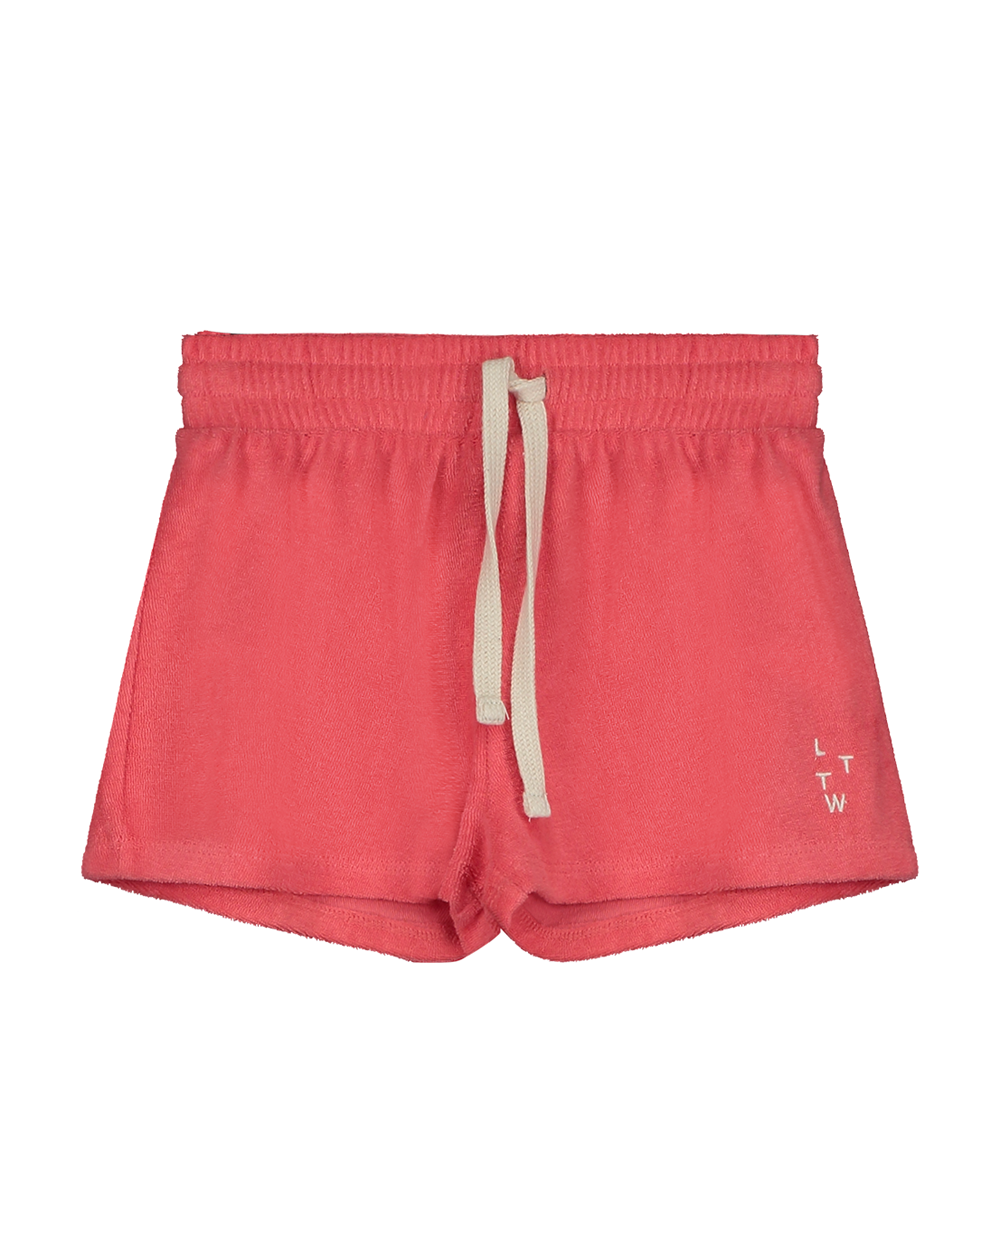 [LETTER TO THE WORLD] AMSTERDAM SHORTS / WATERMELON